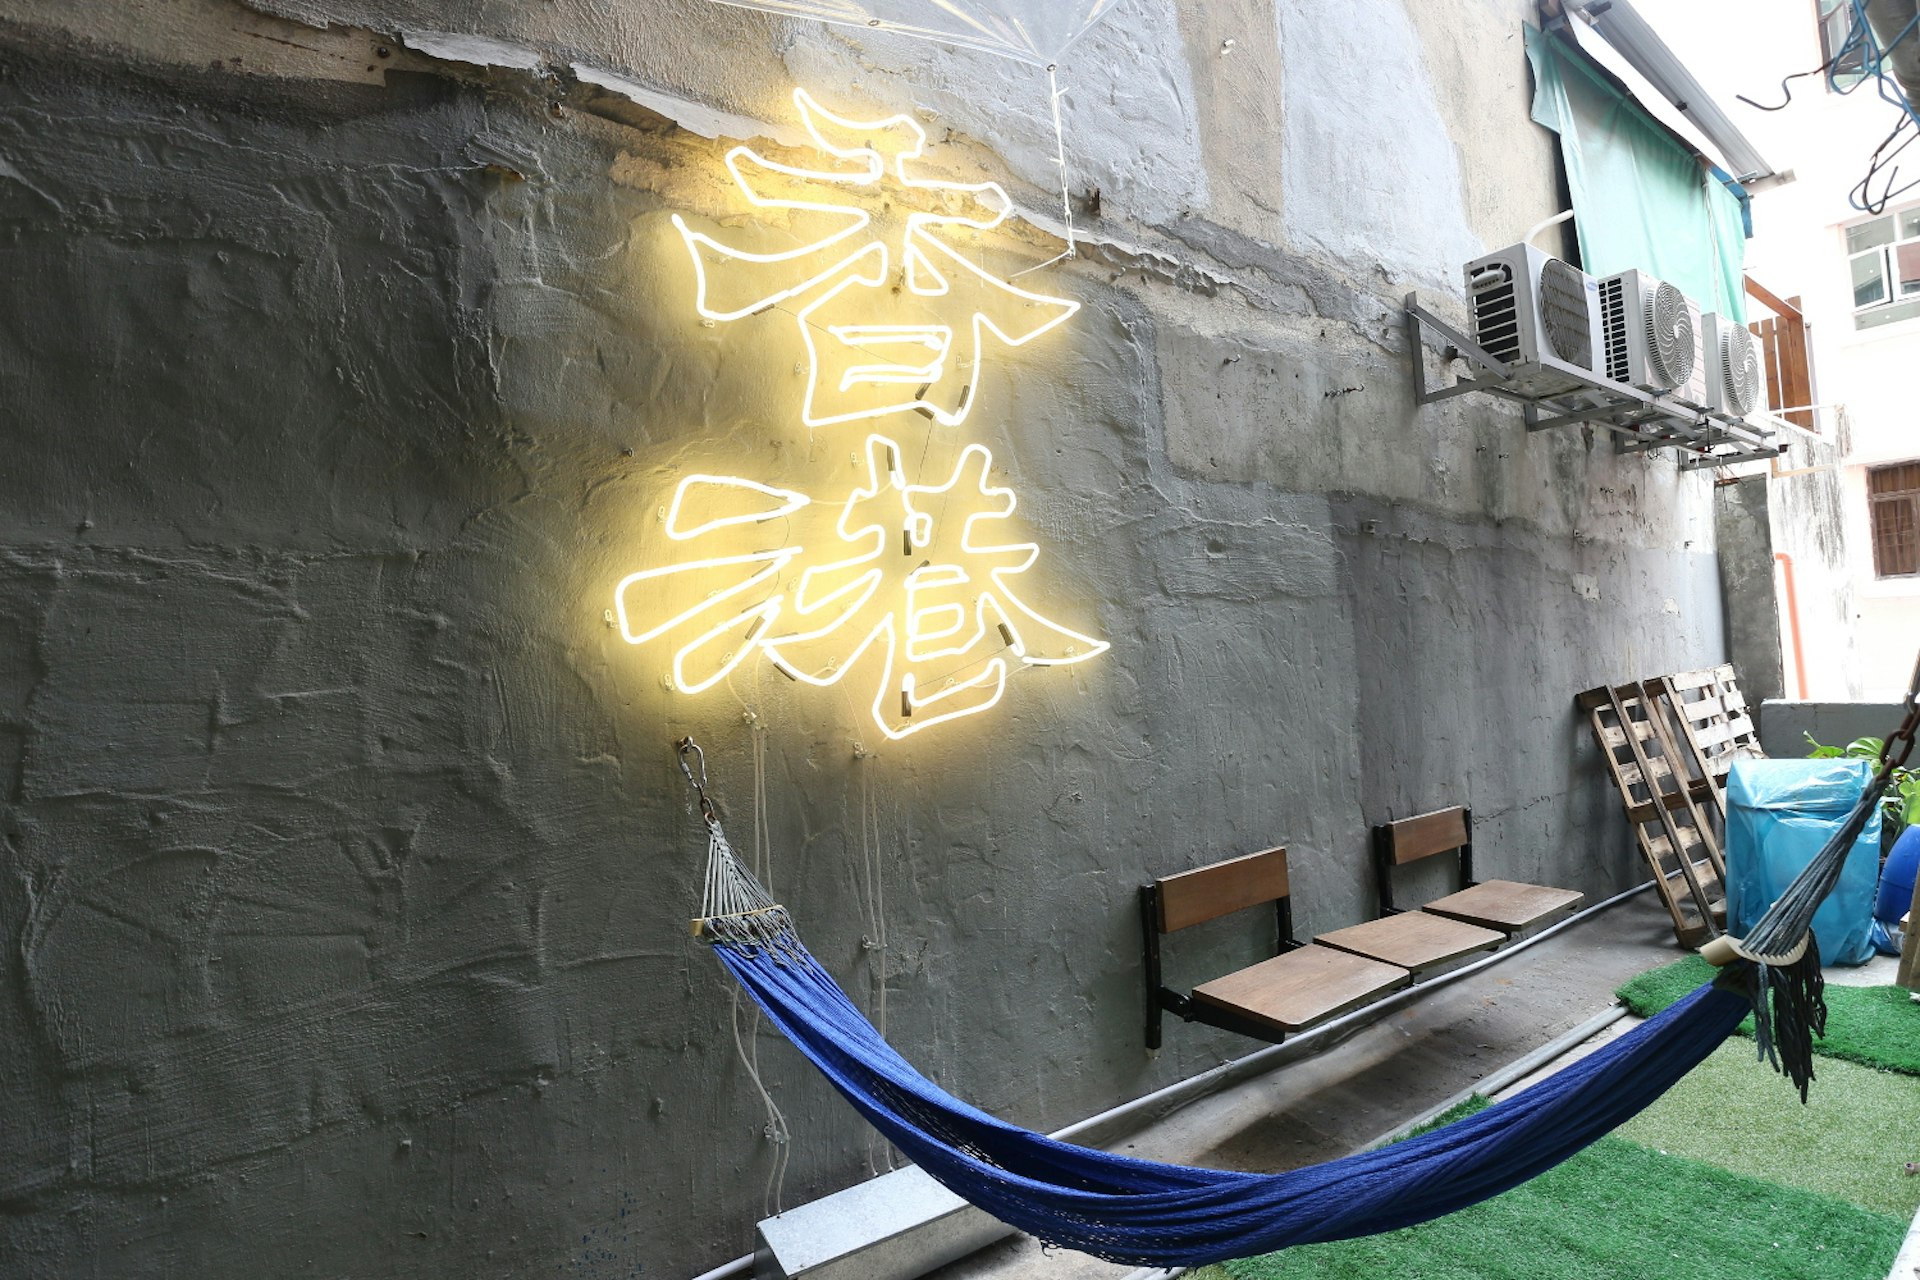 Escape the bustle: Wontonmeen's chill-out area. Image by Piera Chen / Lonely Planet